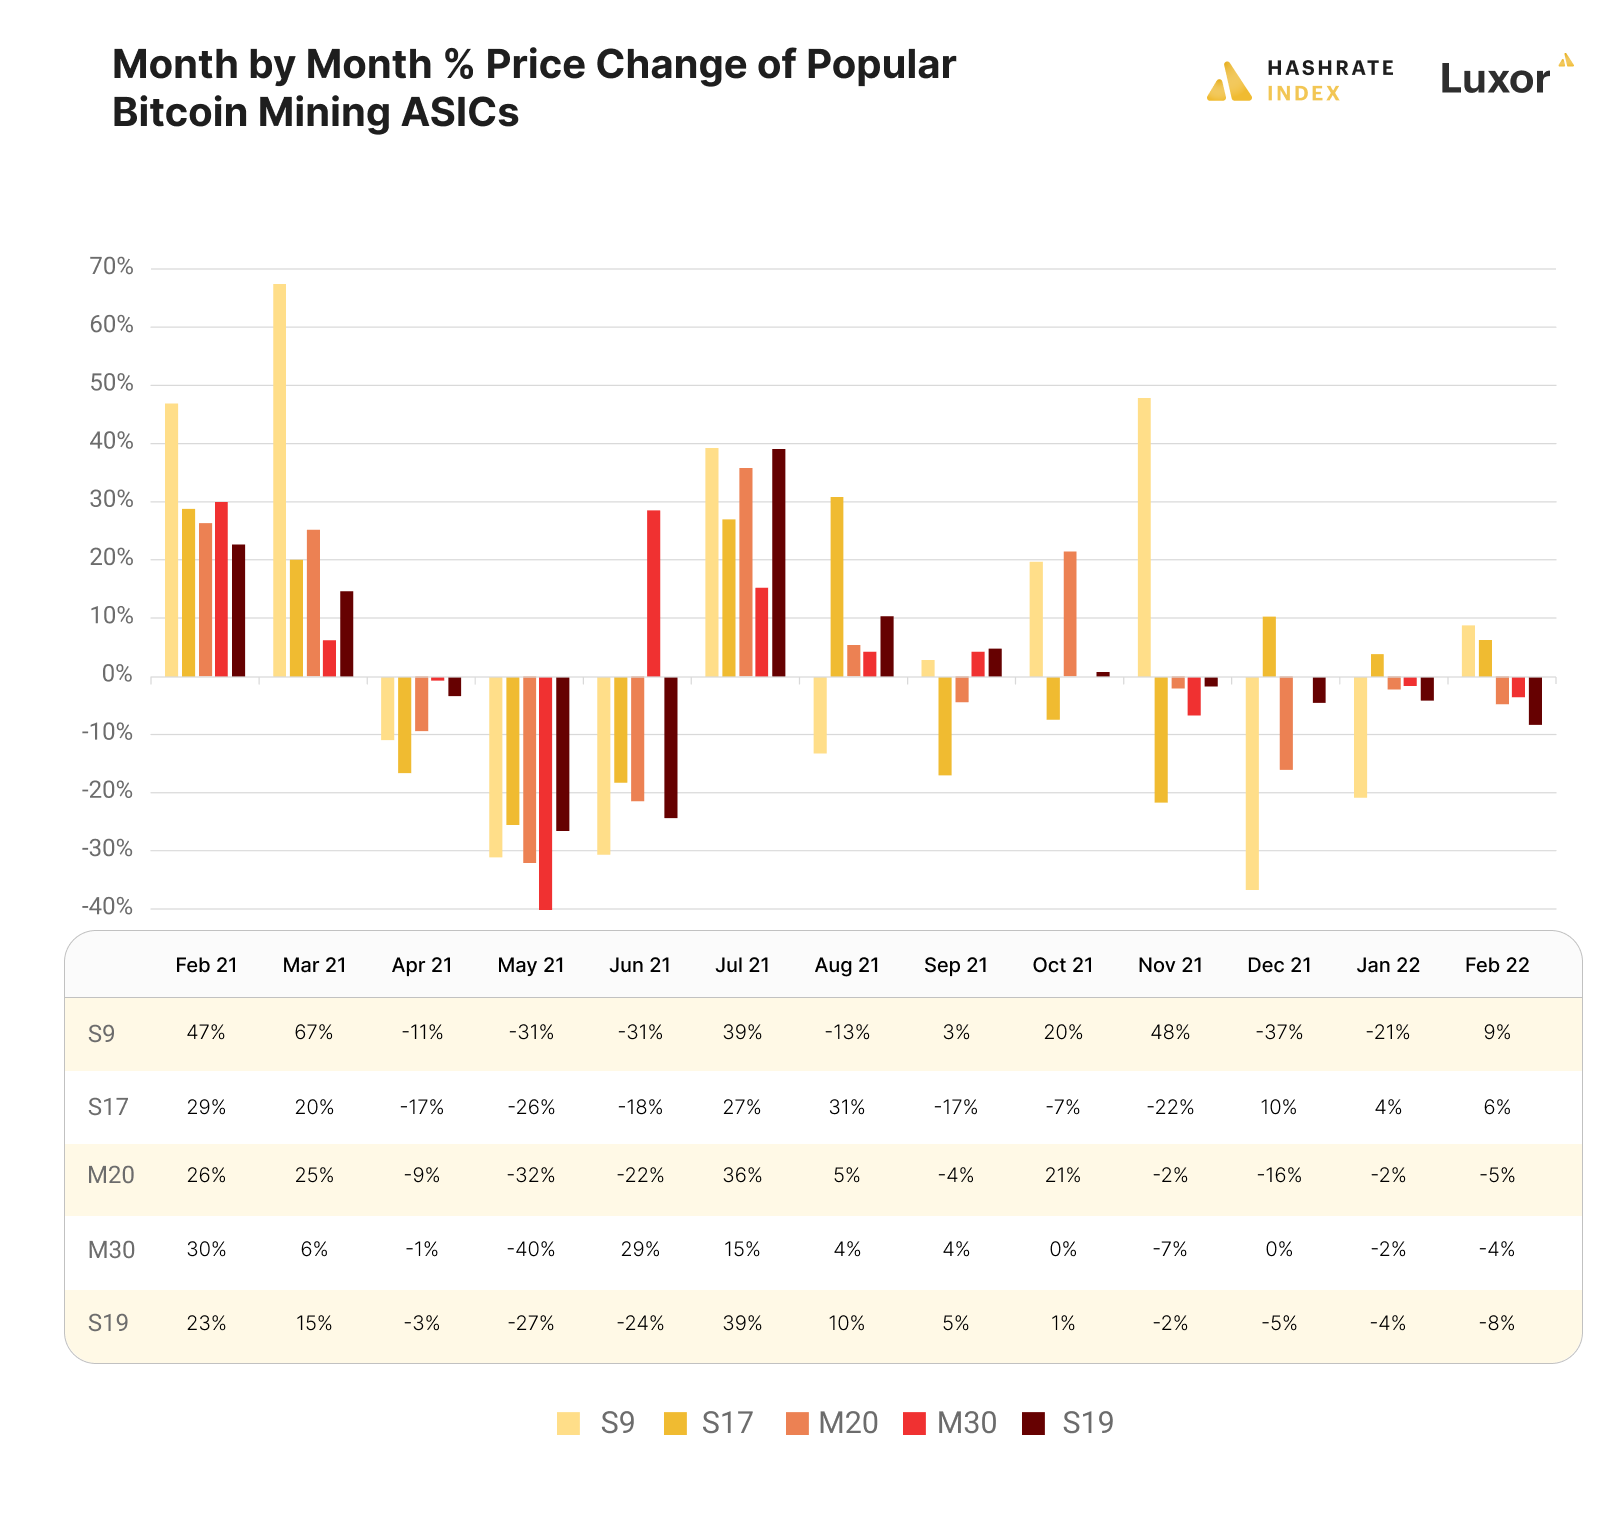 Bitcoin miner price changes, month-over-month February 2021 - February2022